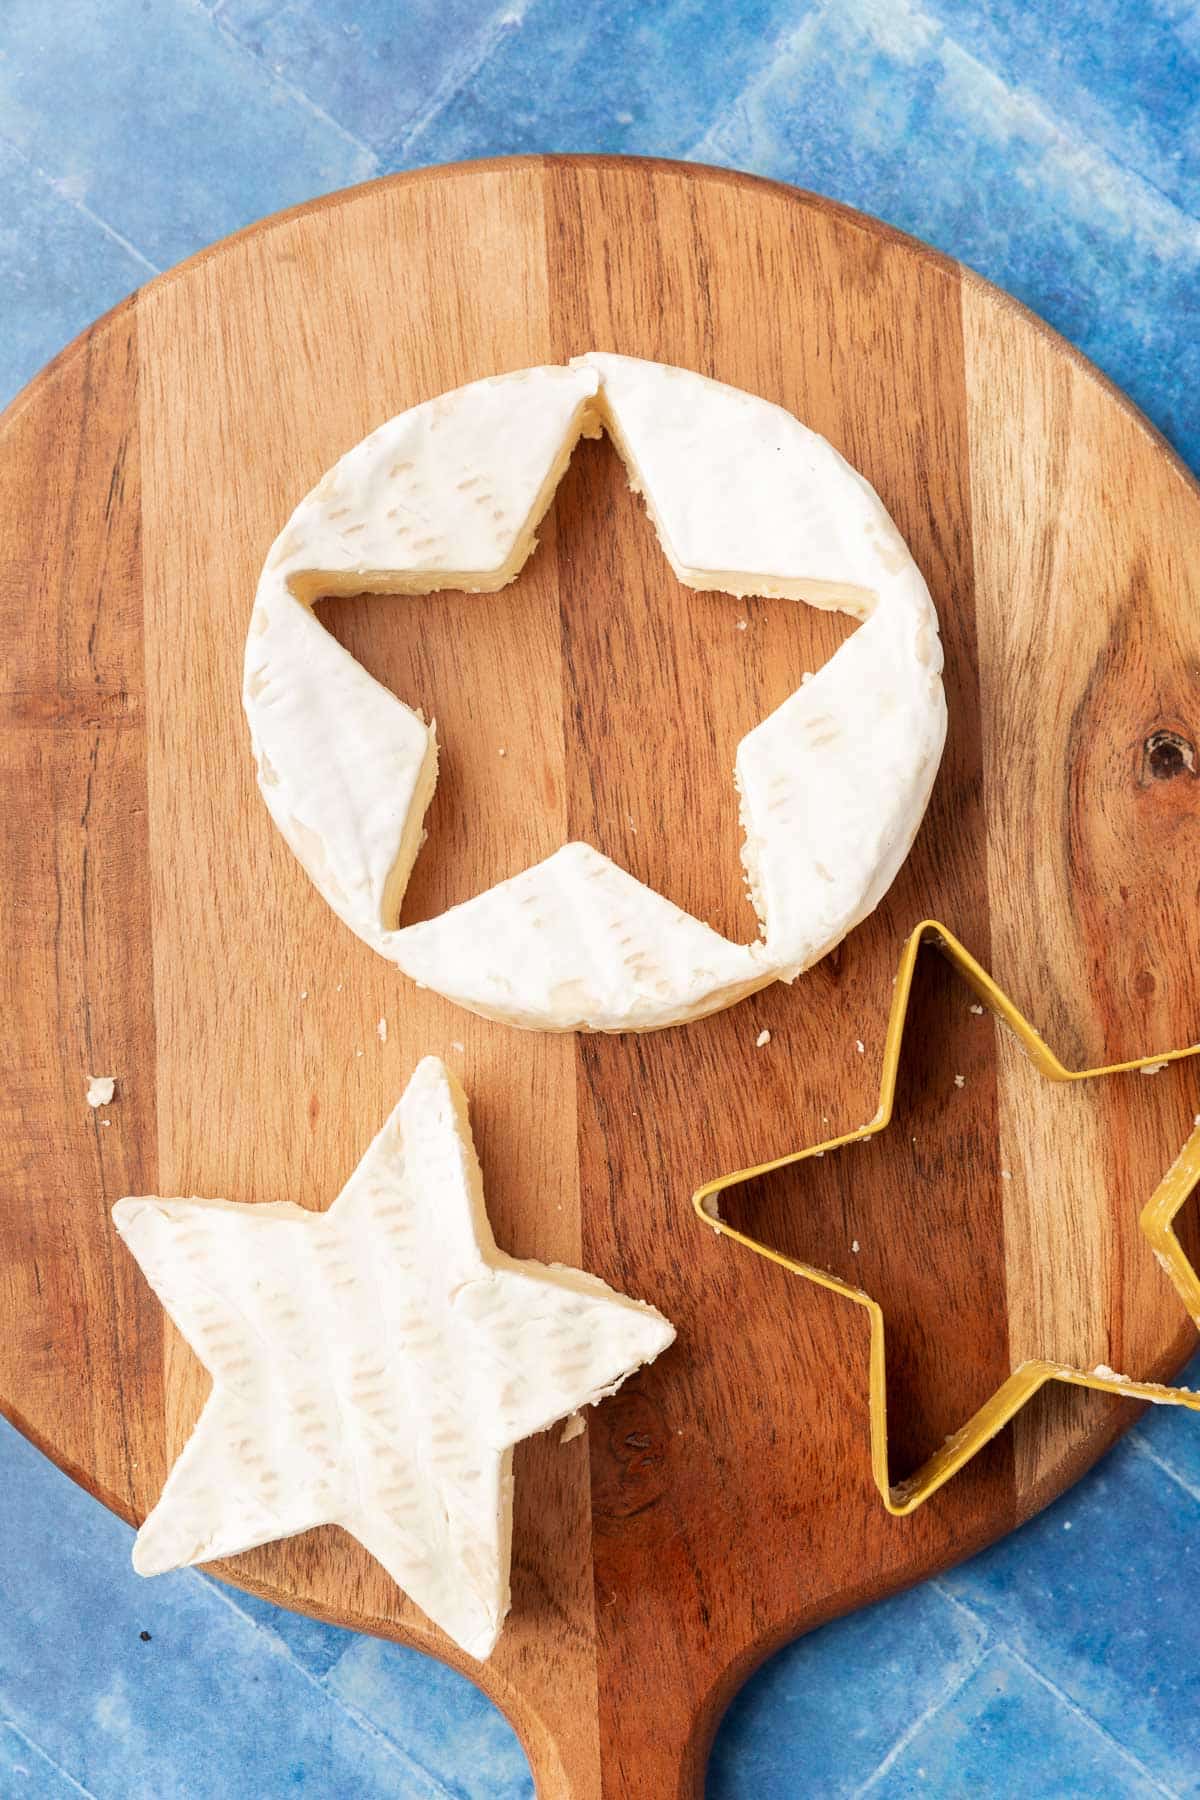 A small wood cutting board with a brie round that has a star shape cut out of it with a star cookie cutter and the center of the brie next to it.